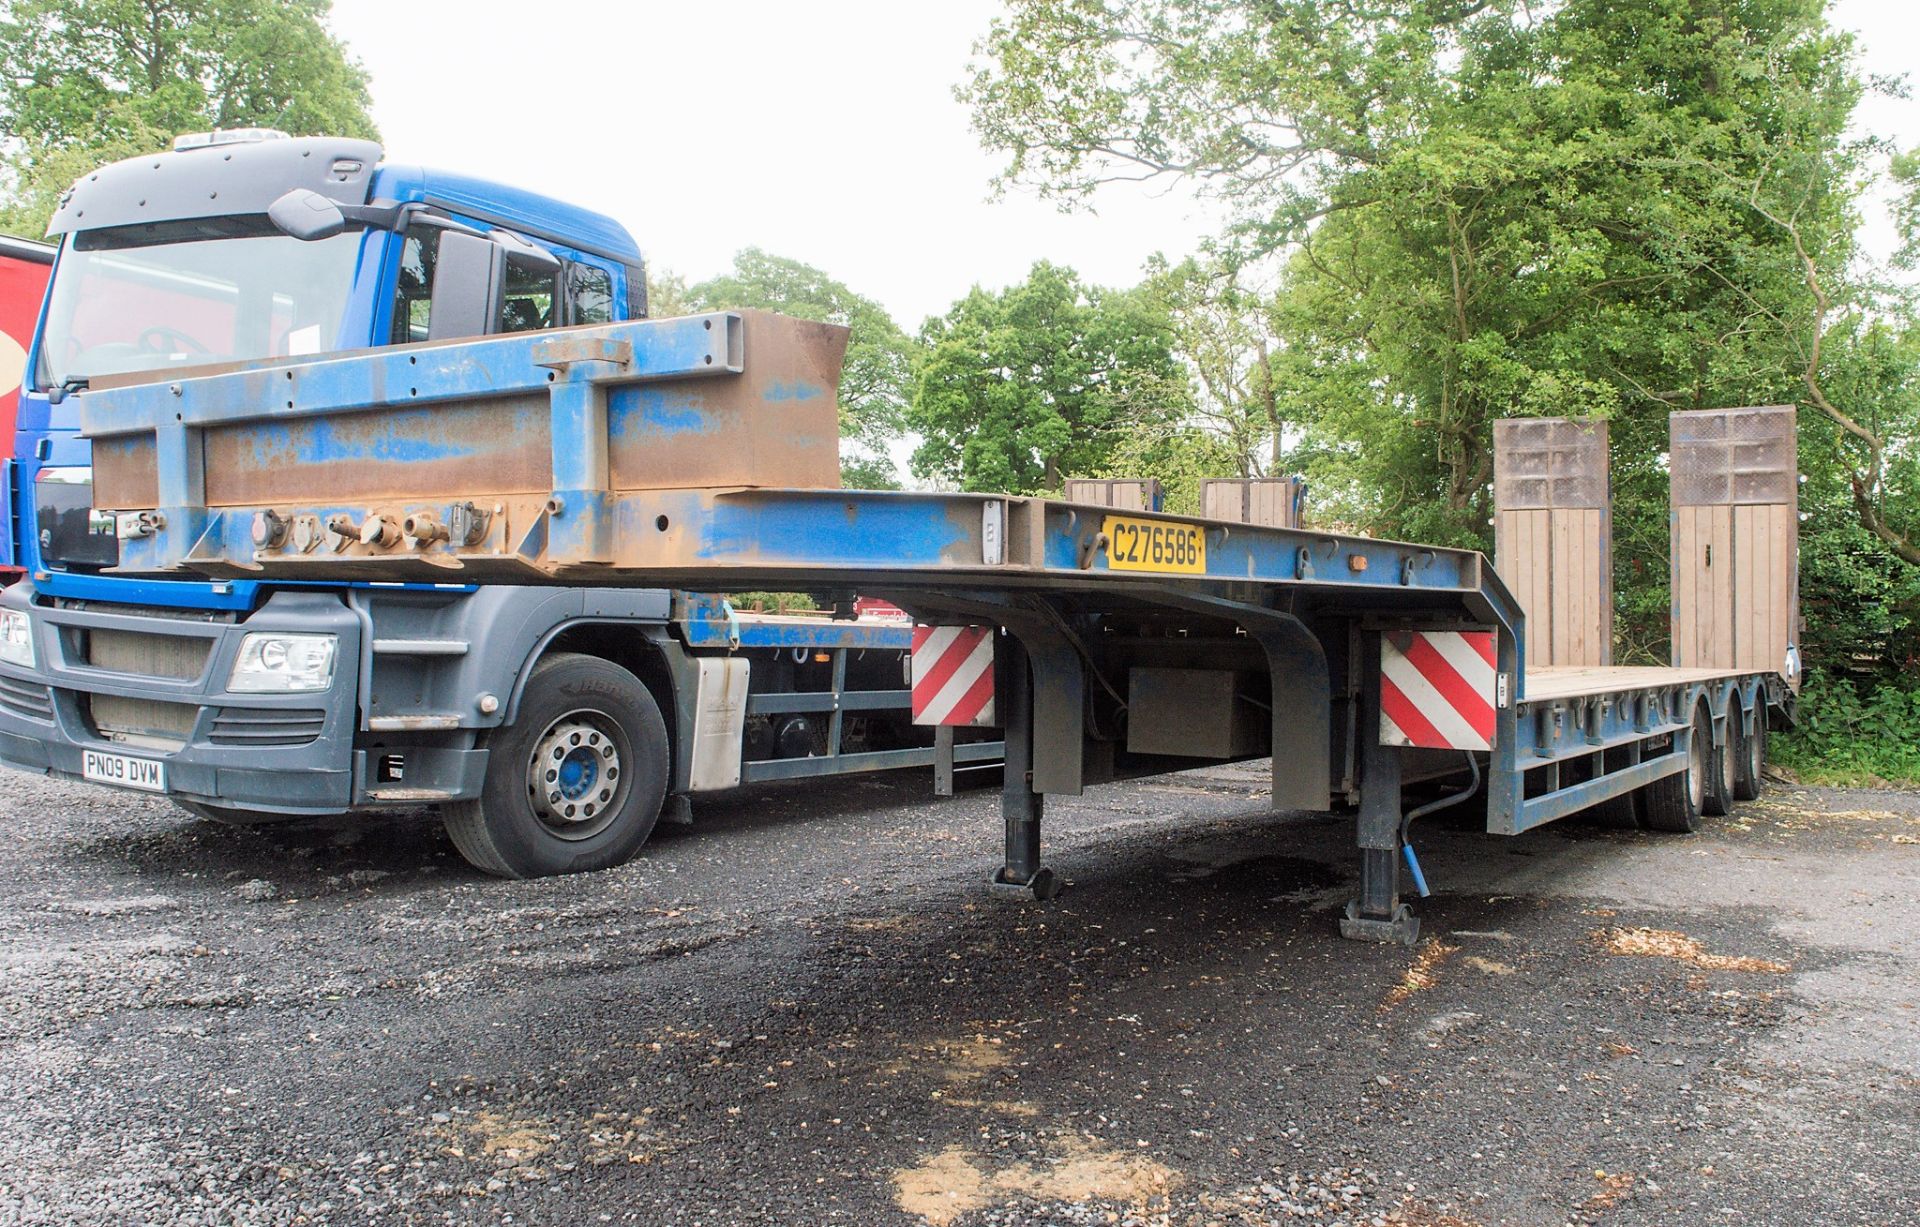 King GTS 444 tri axle step frame low loader Year: 2008 S/N: 894081 Ministry No: C276586 c/w